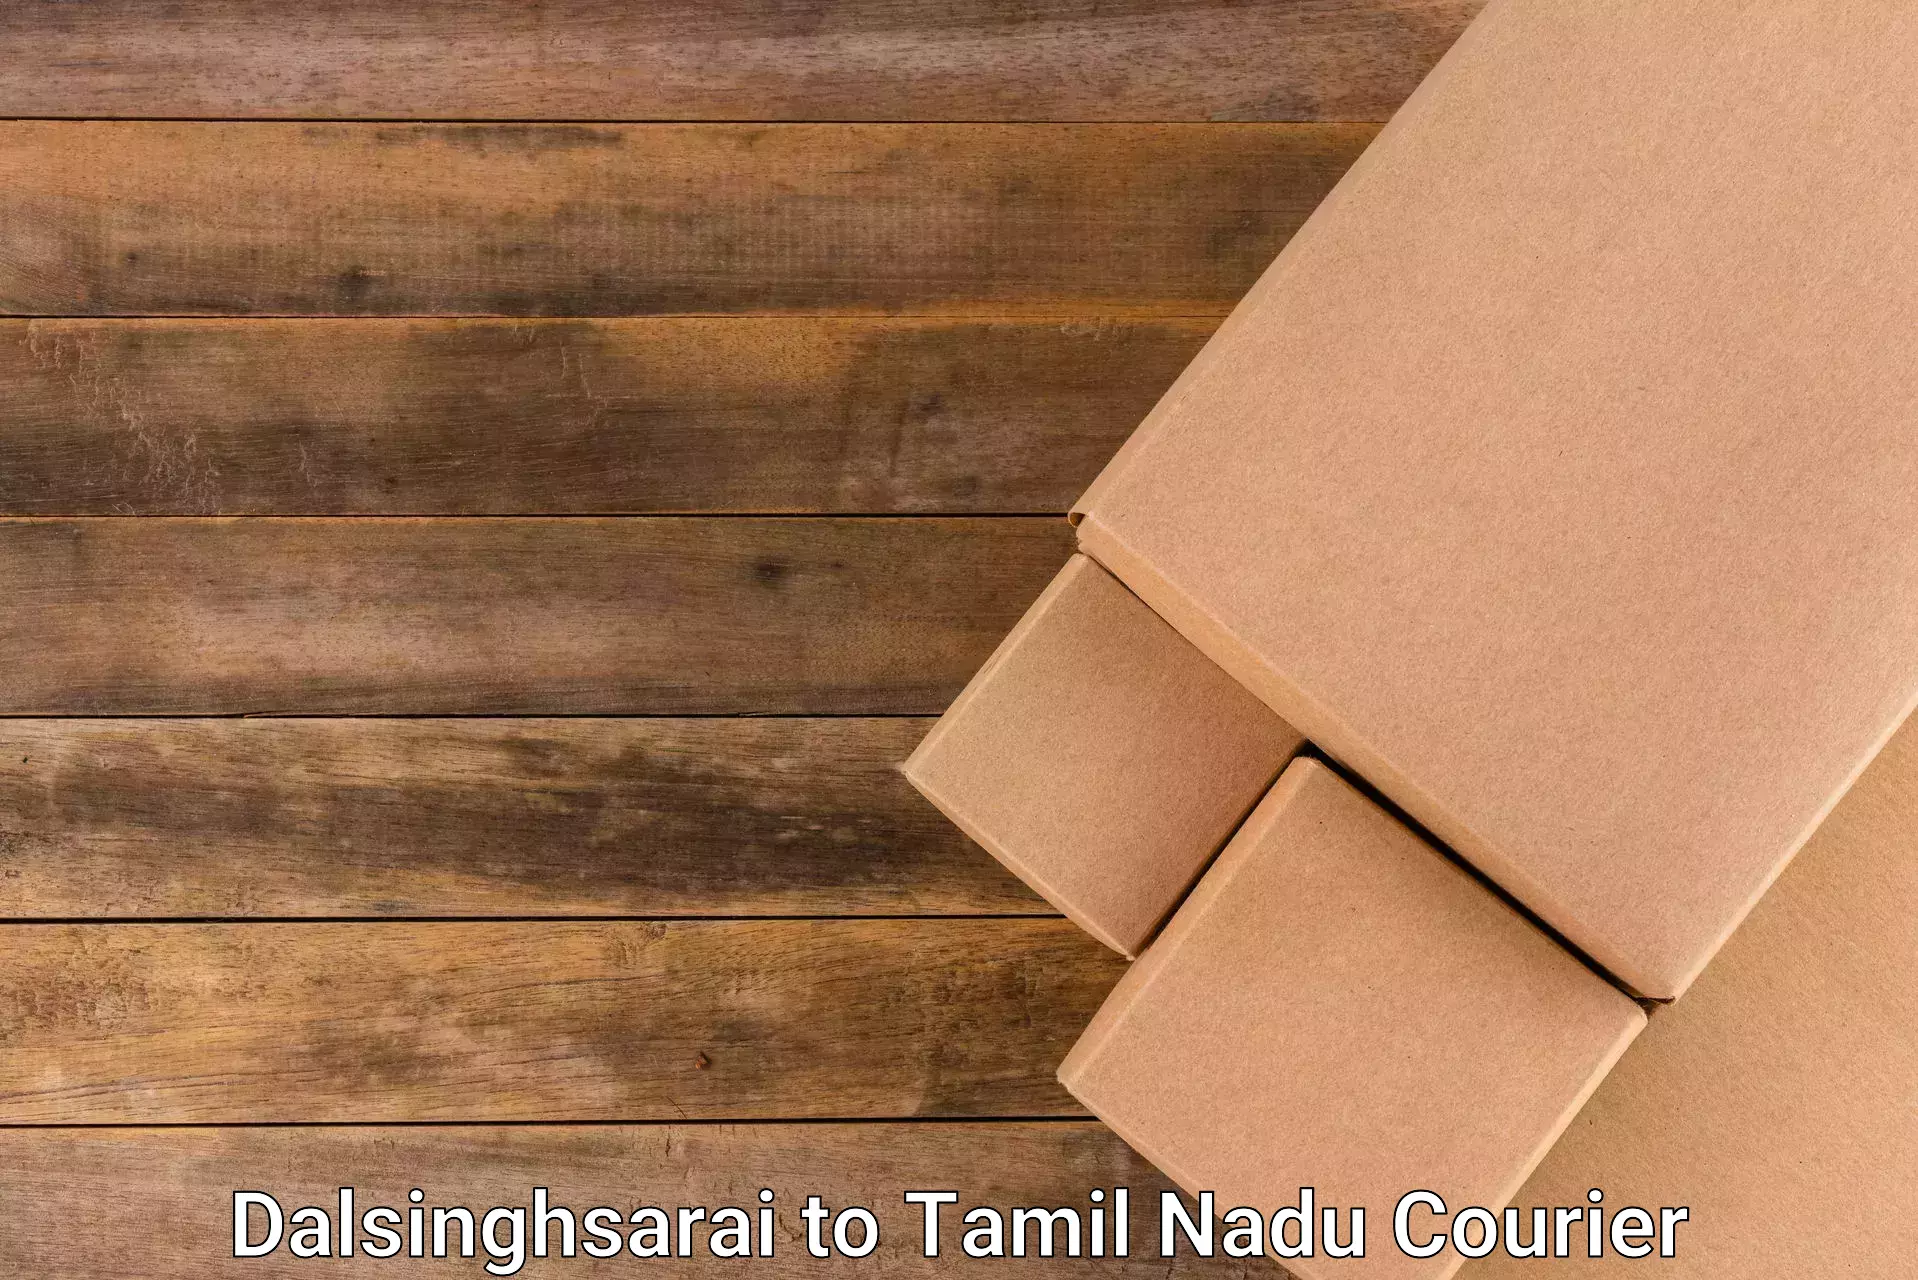 Easy access courier services Dalsinghsarai to Ambattur